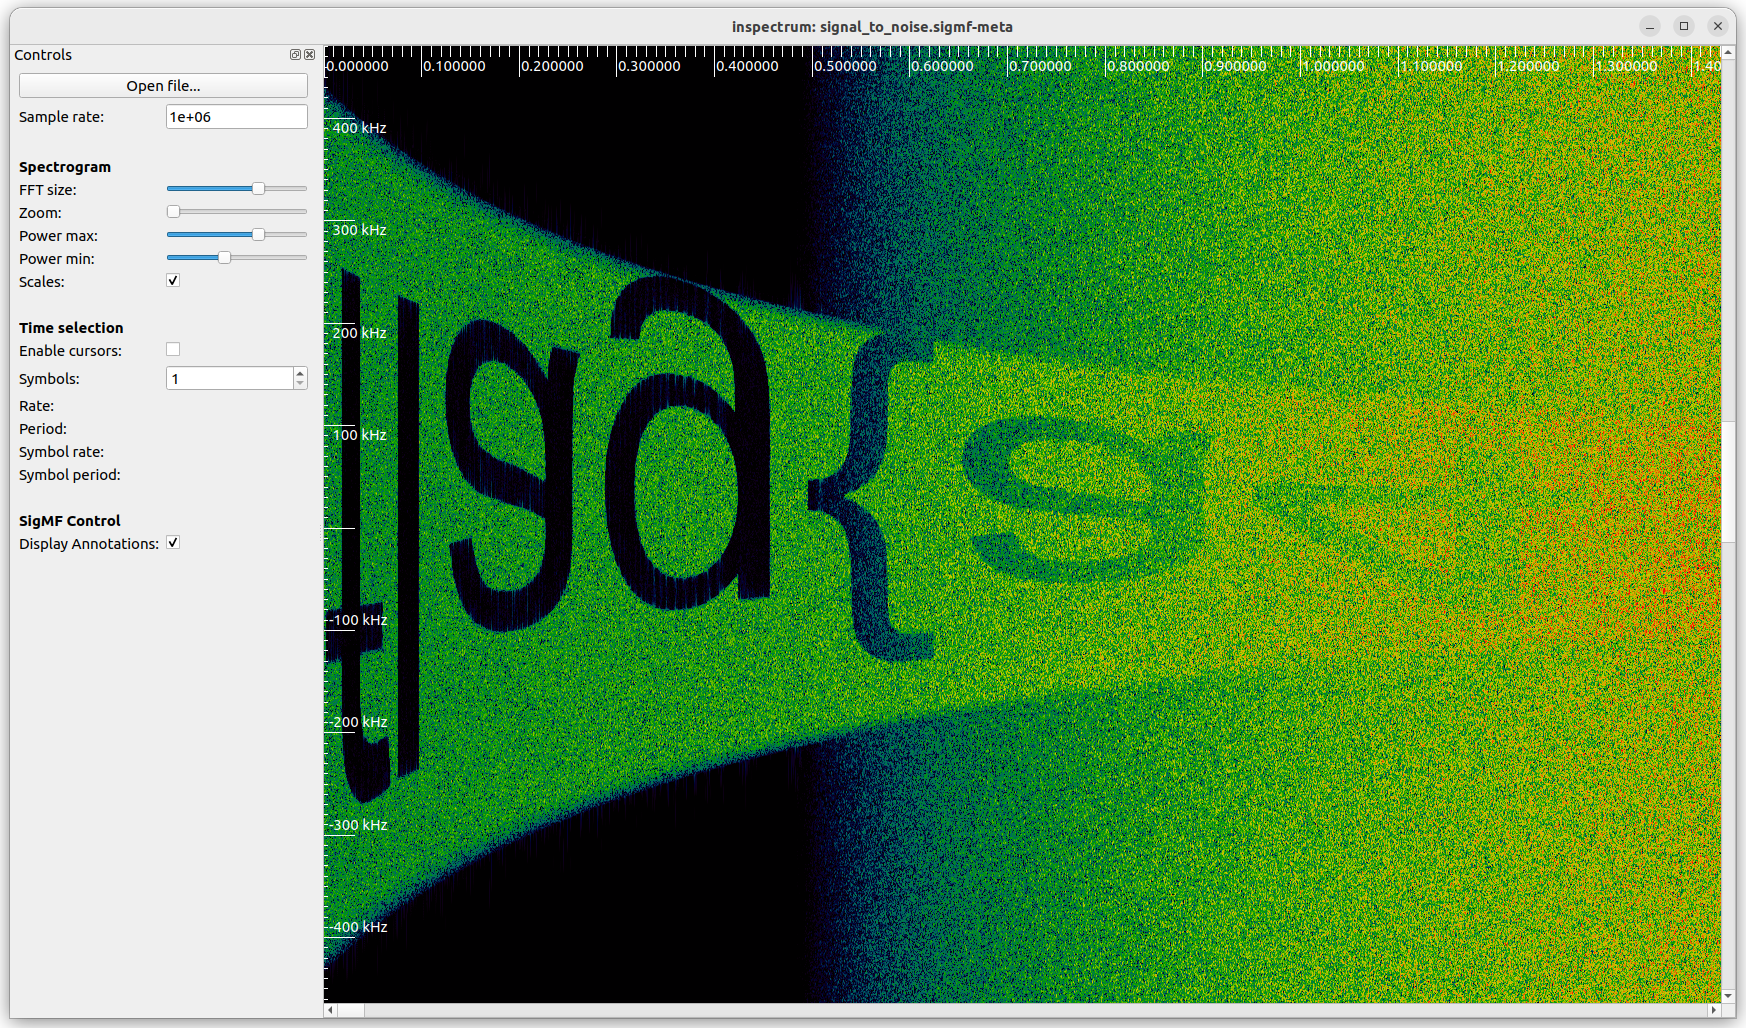 The start of the flag for "Signal to noise", as viewed in inspectrum